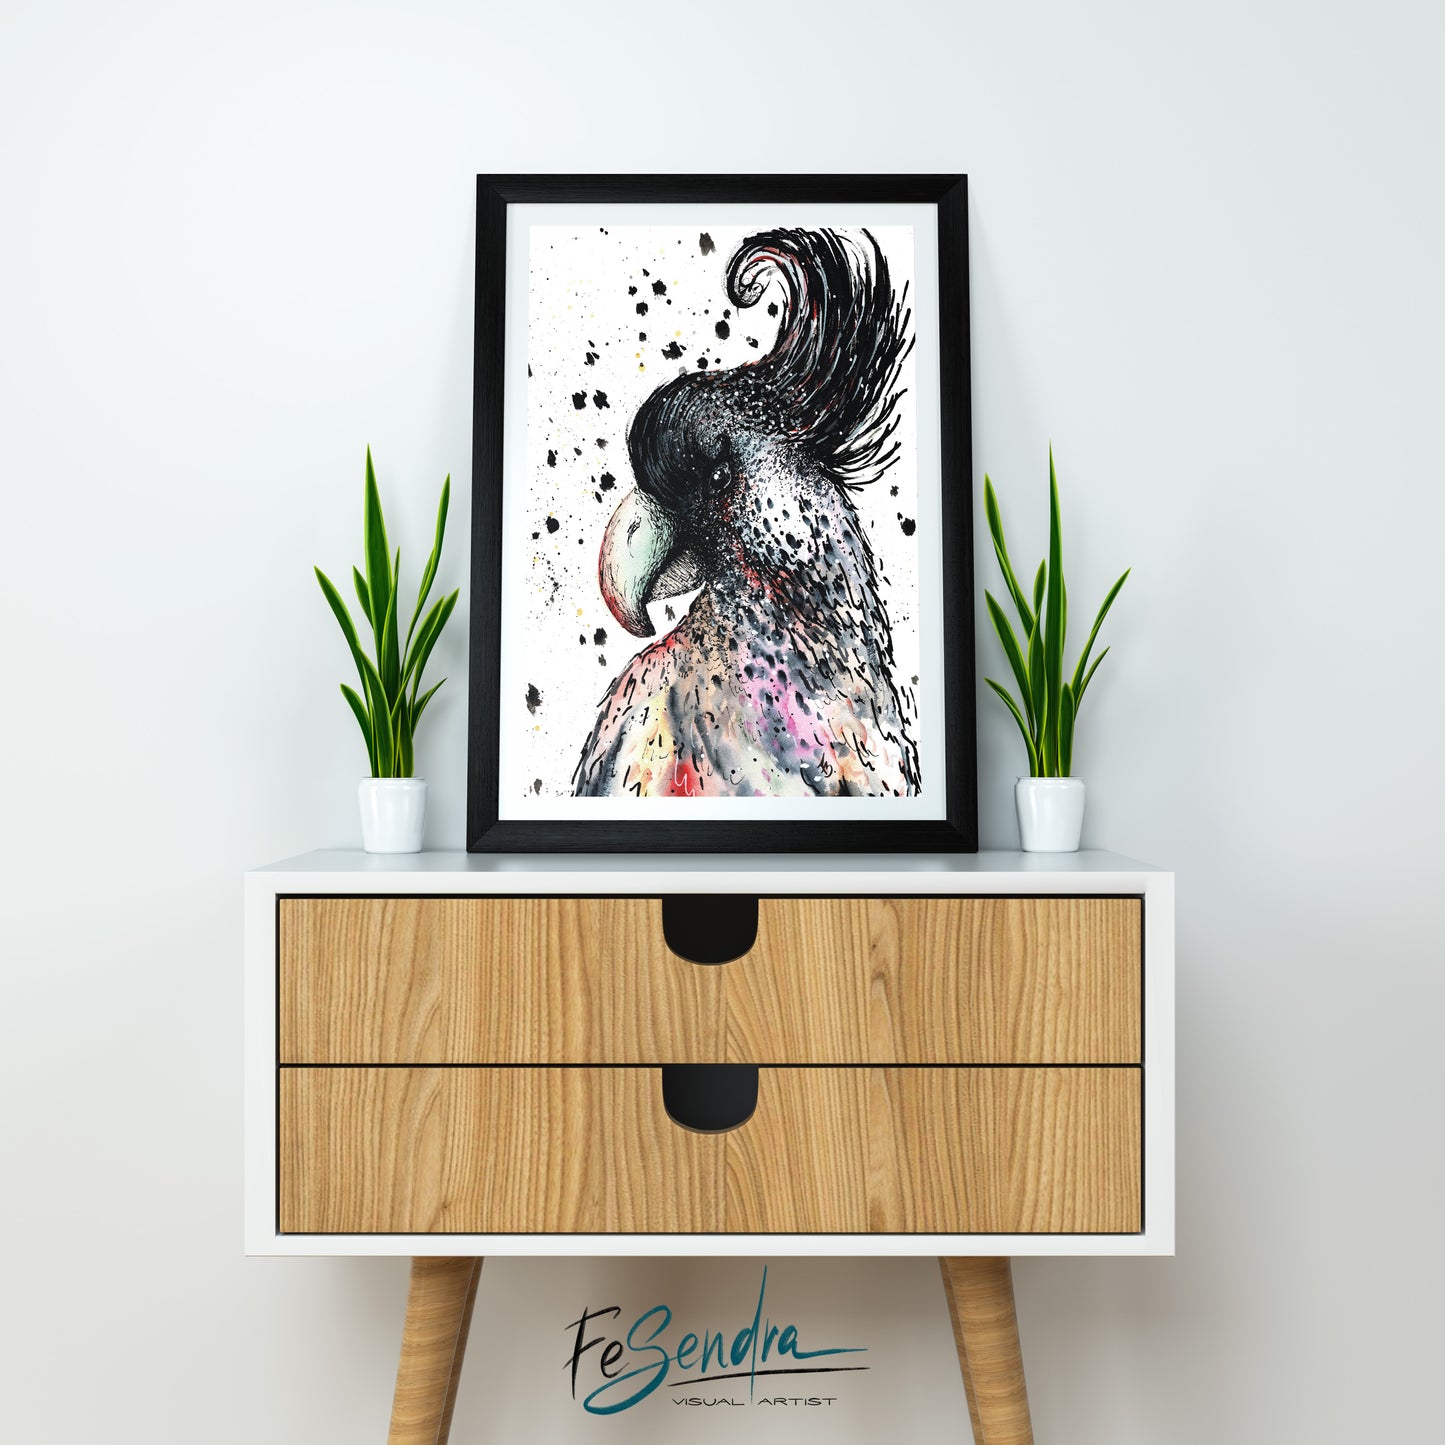 Printed Poster - The bird by FeSendra